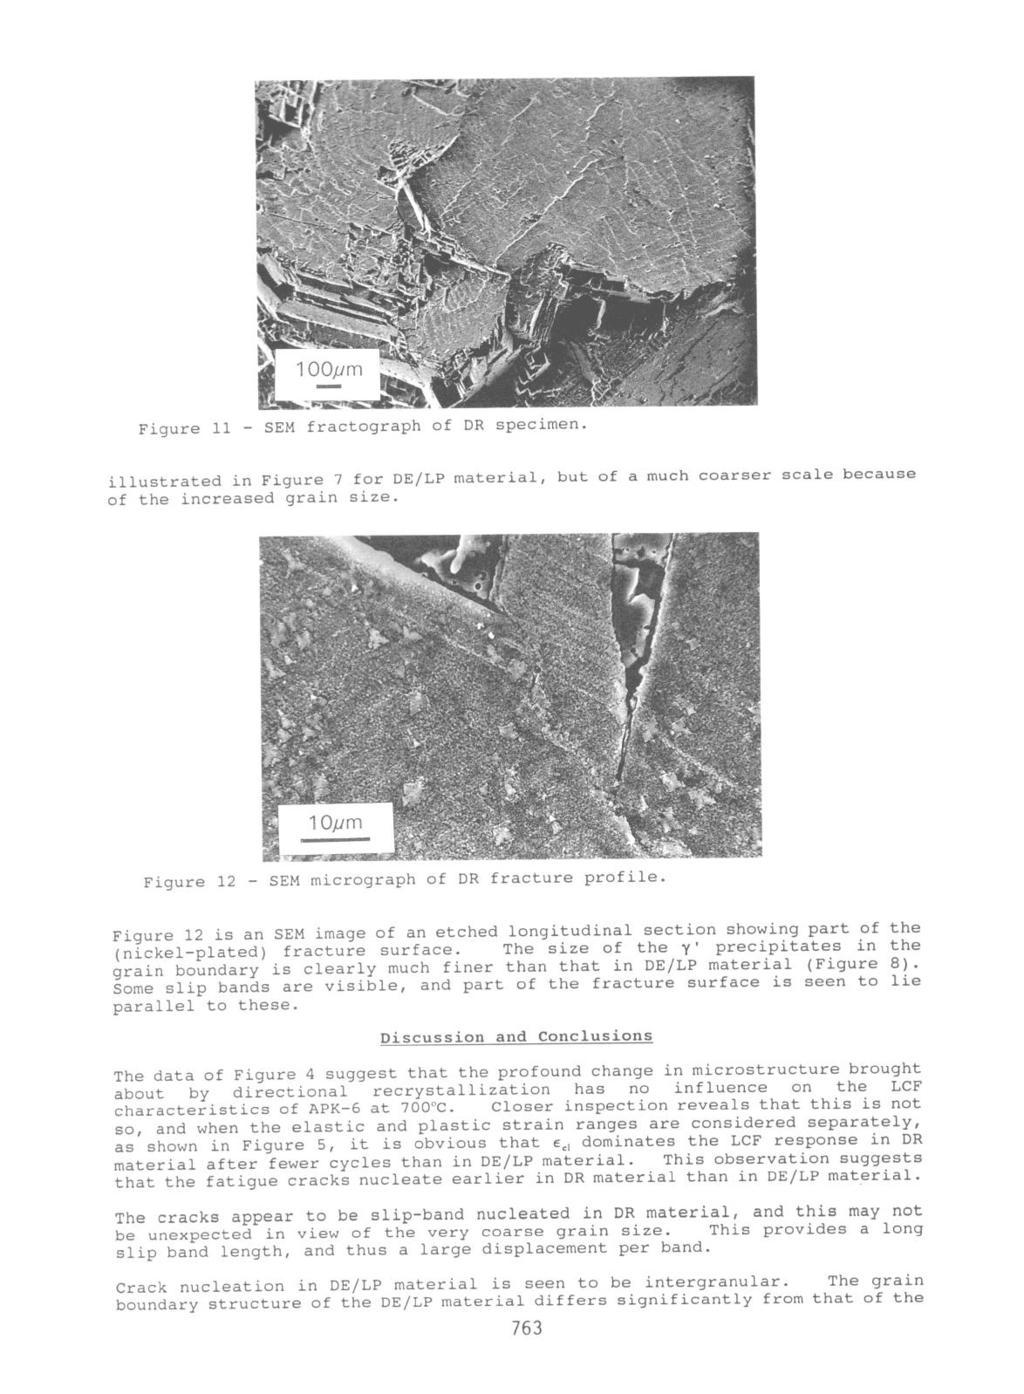 Figure 11 - SEM fractograph of DR specimen. illustrated in Figure I for DE/LP material, but of a much coarser scale because of the increased grain size.